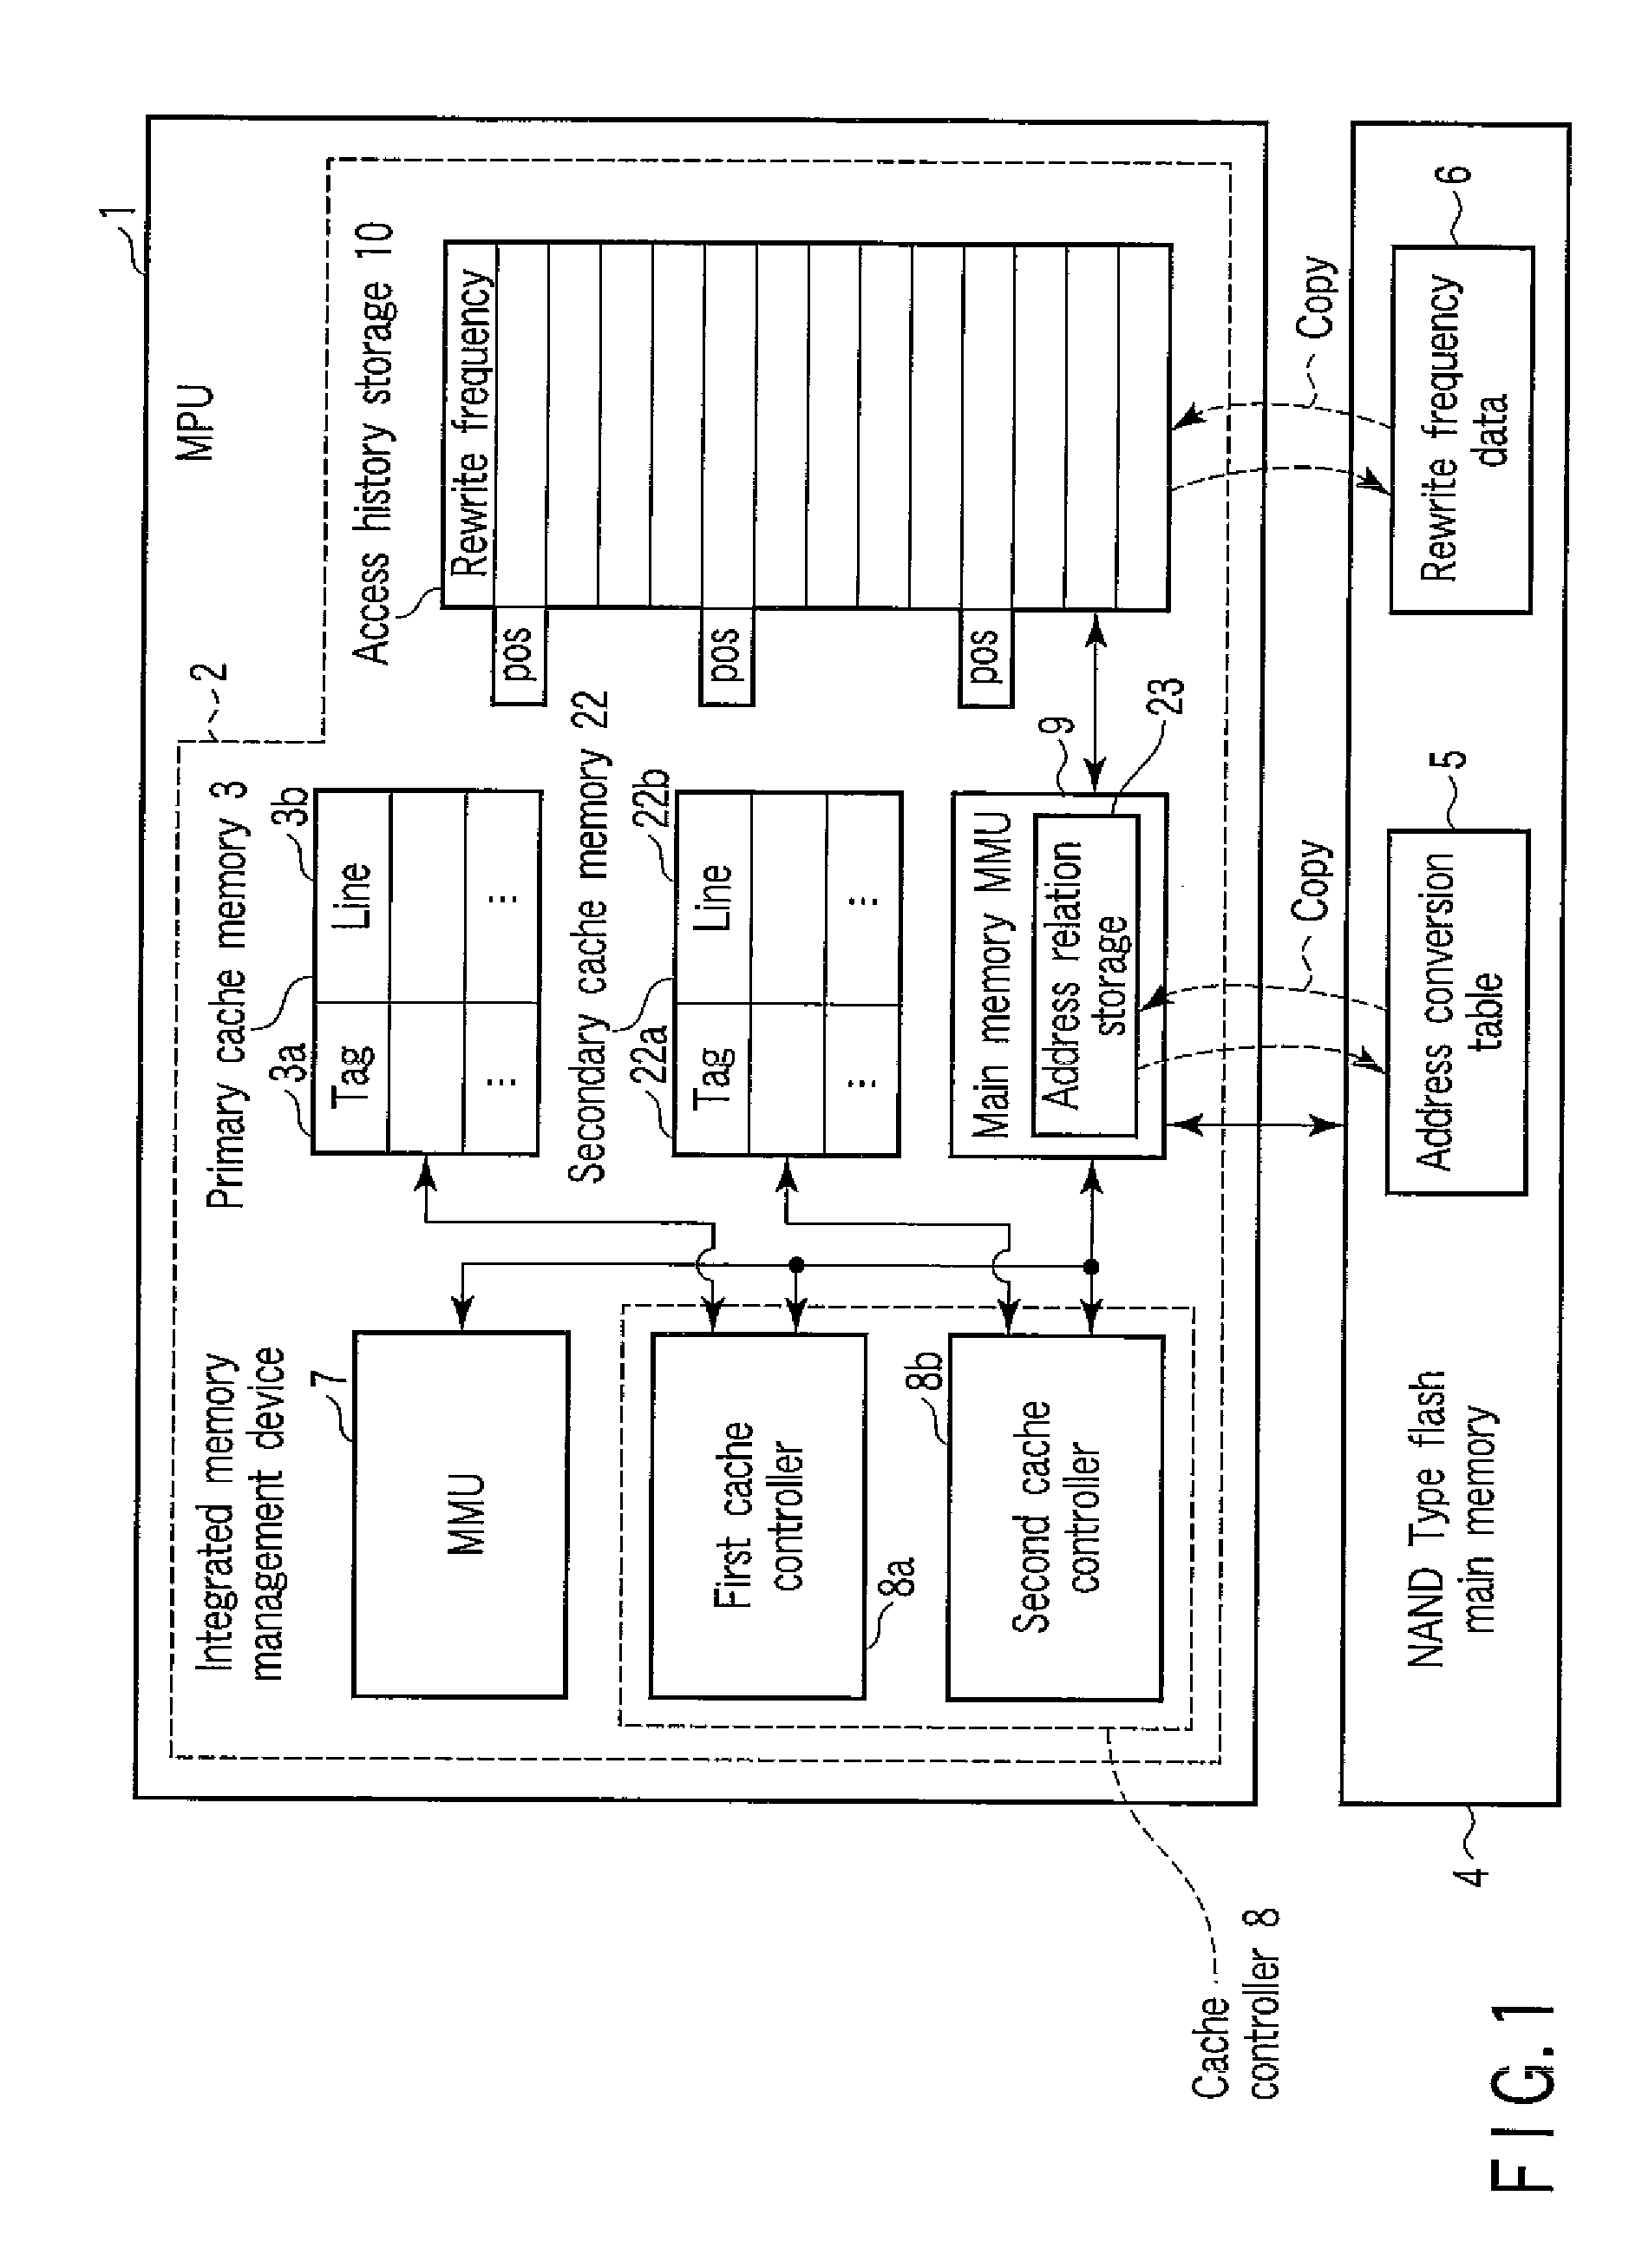 Integrated memory management and memory management method